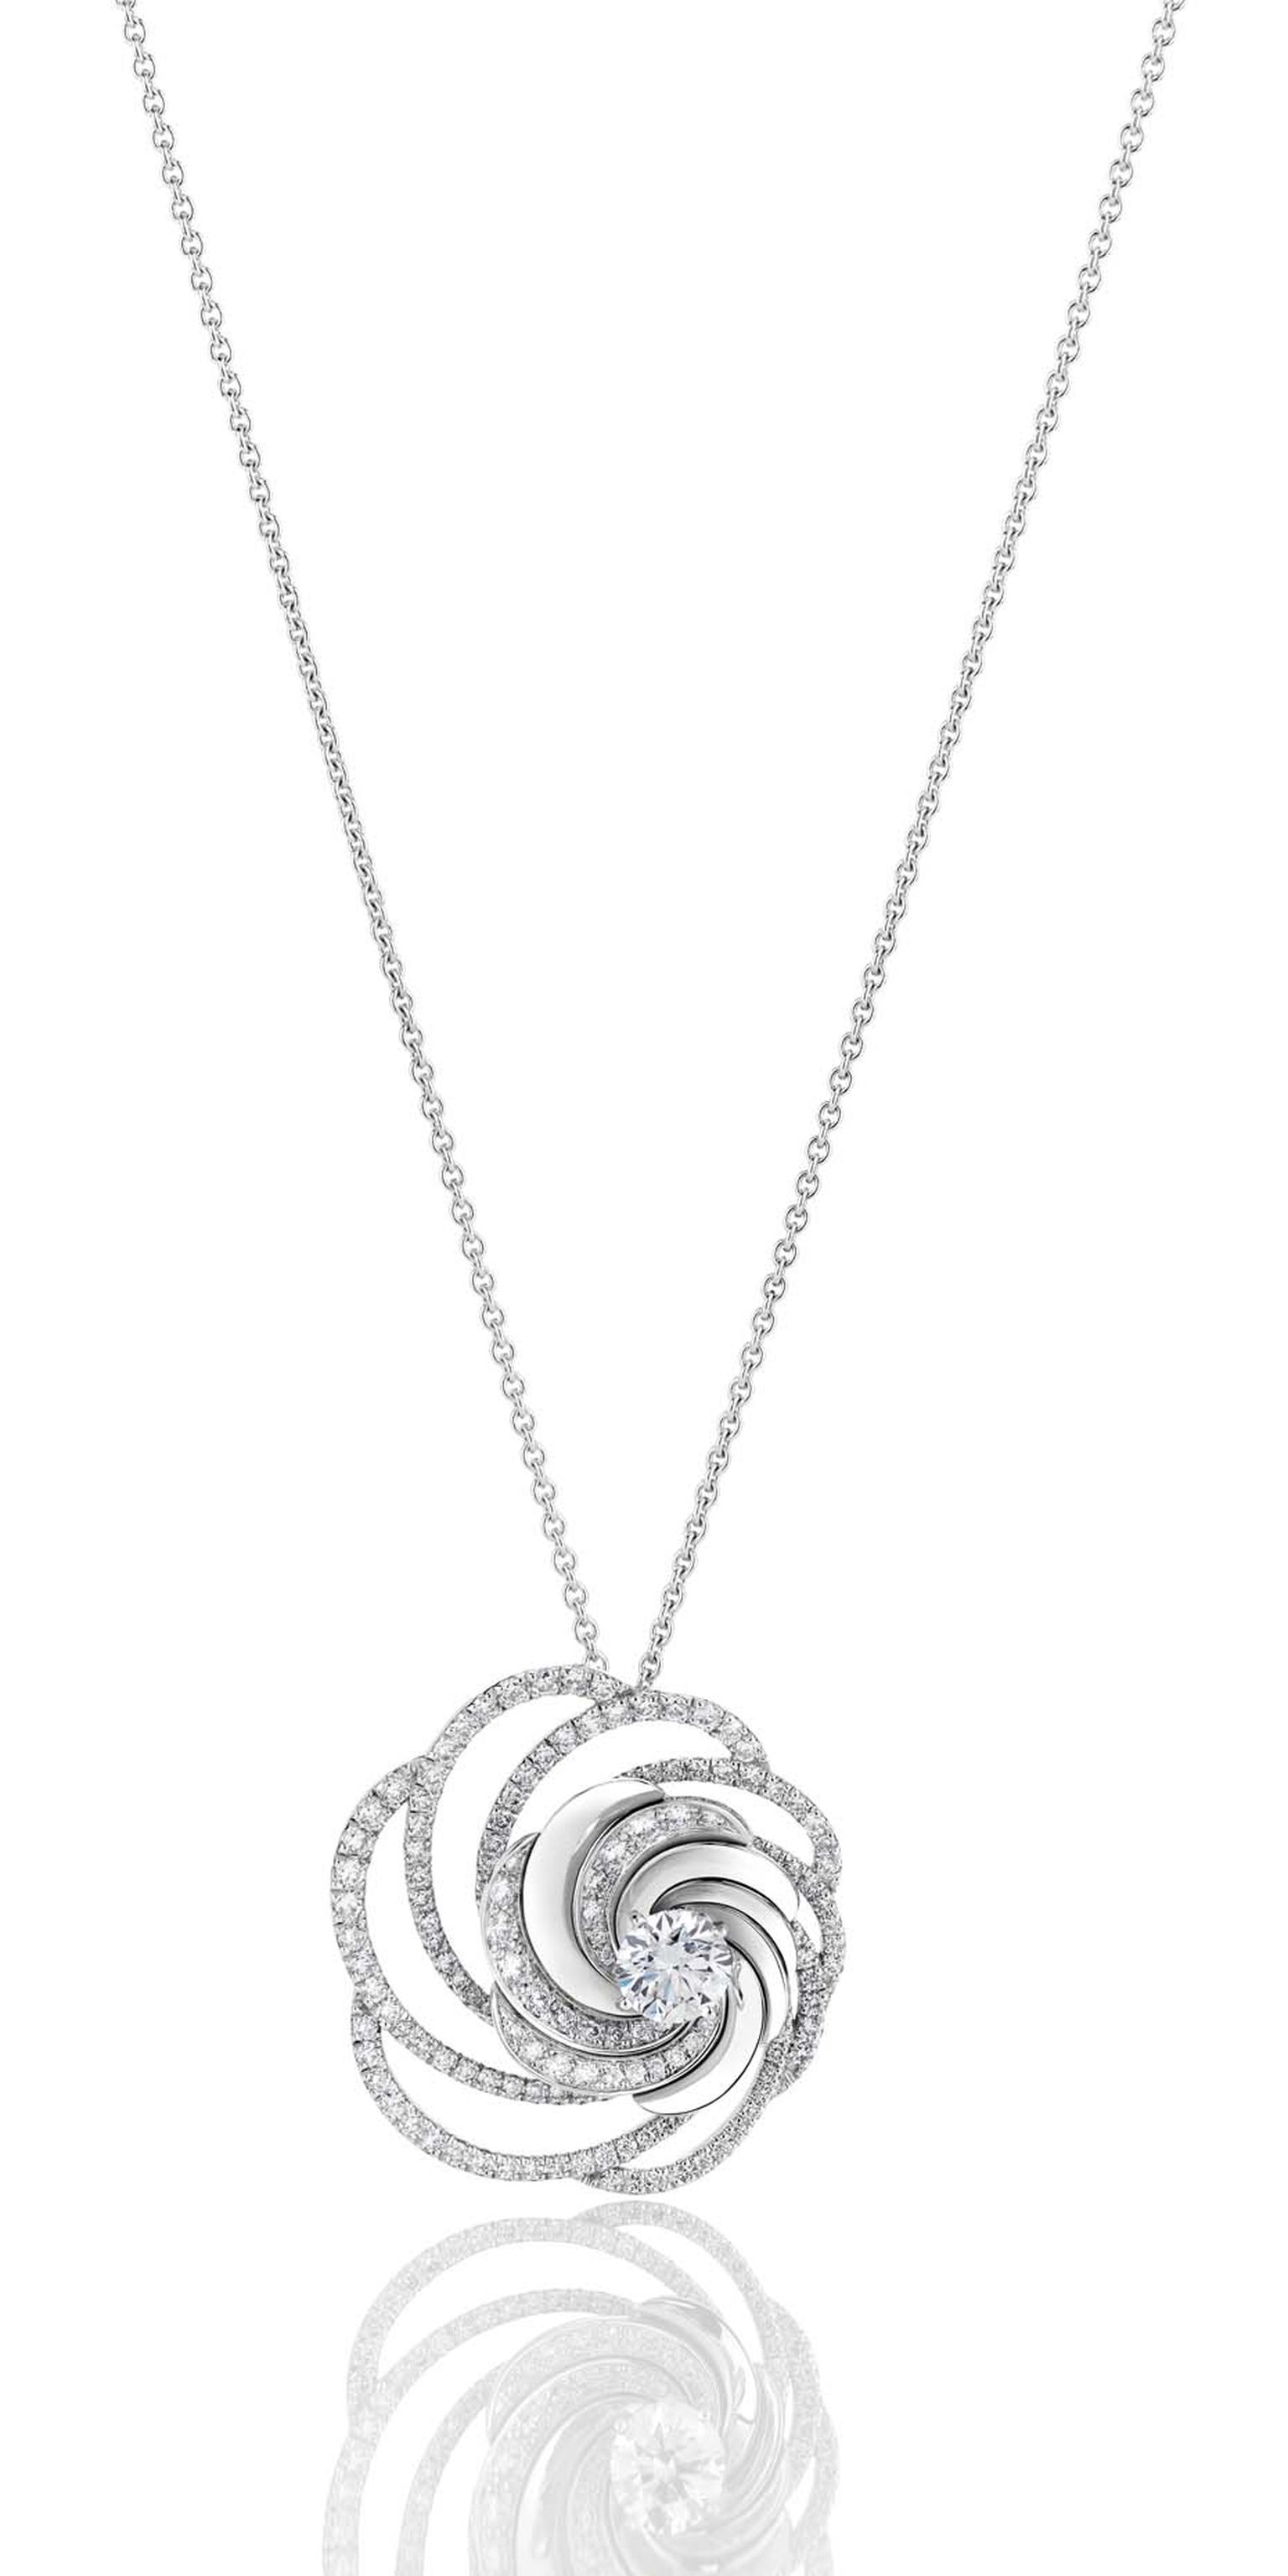 De Beers Aria necklace in white gold embellished with pavé diamonds surrounding a central brilliant-cut diamond.